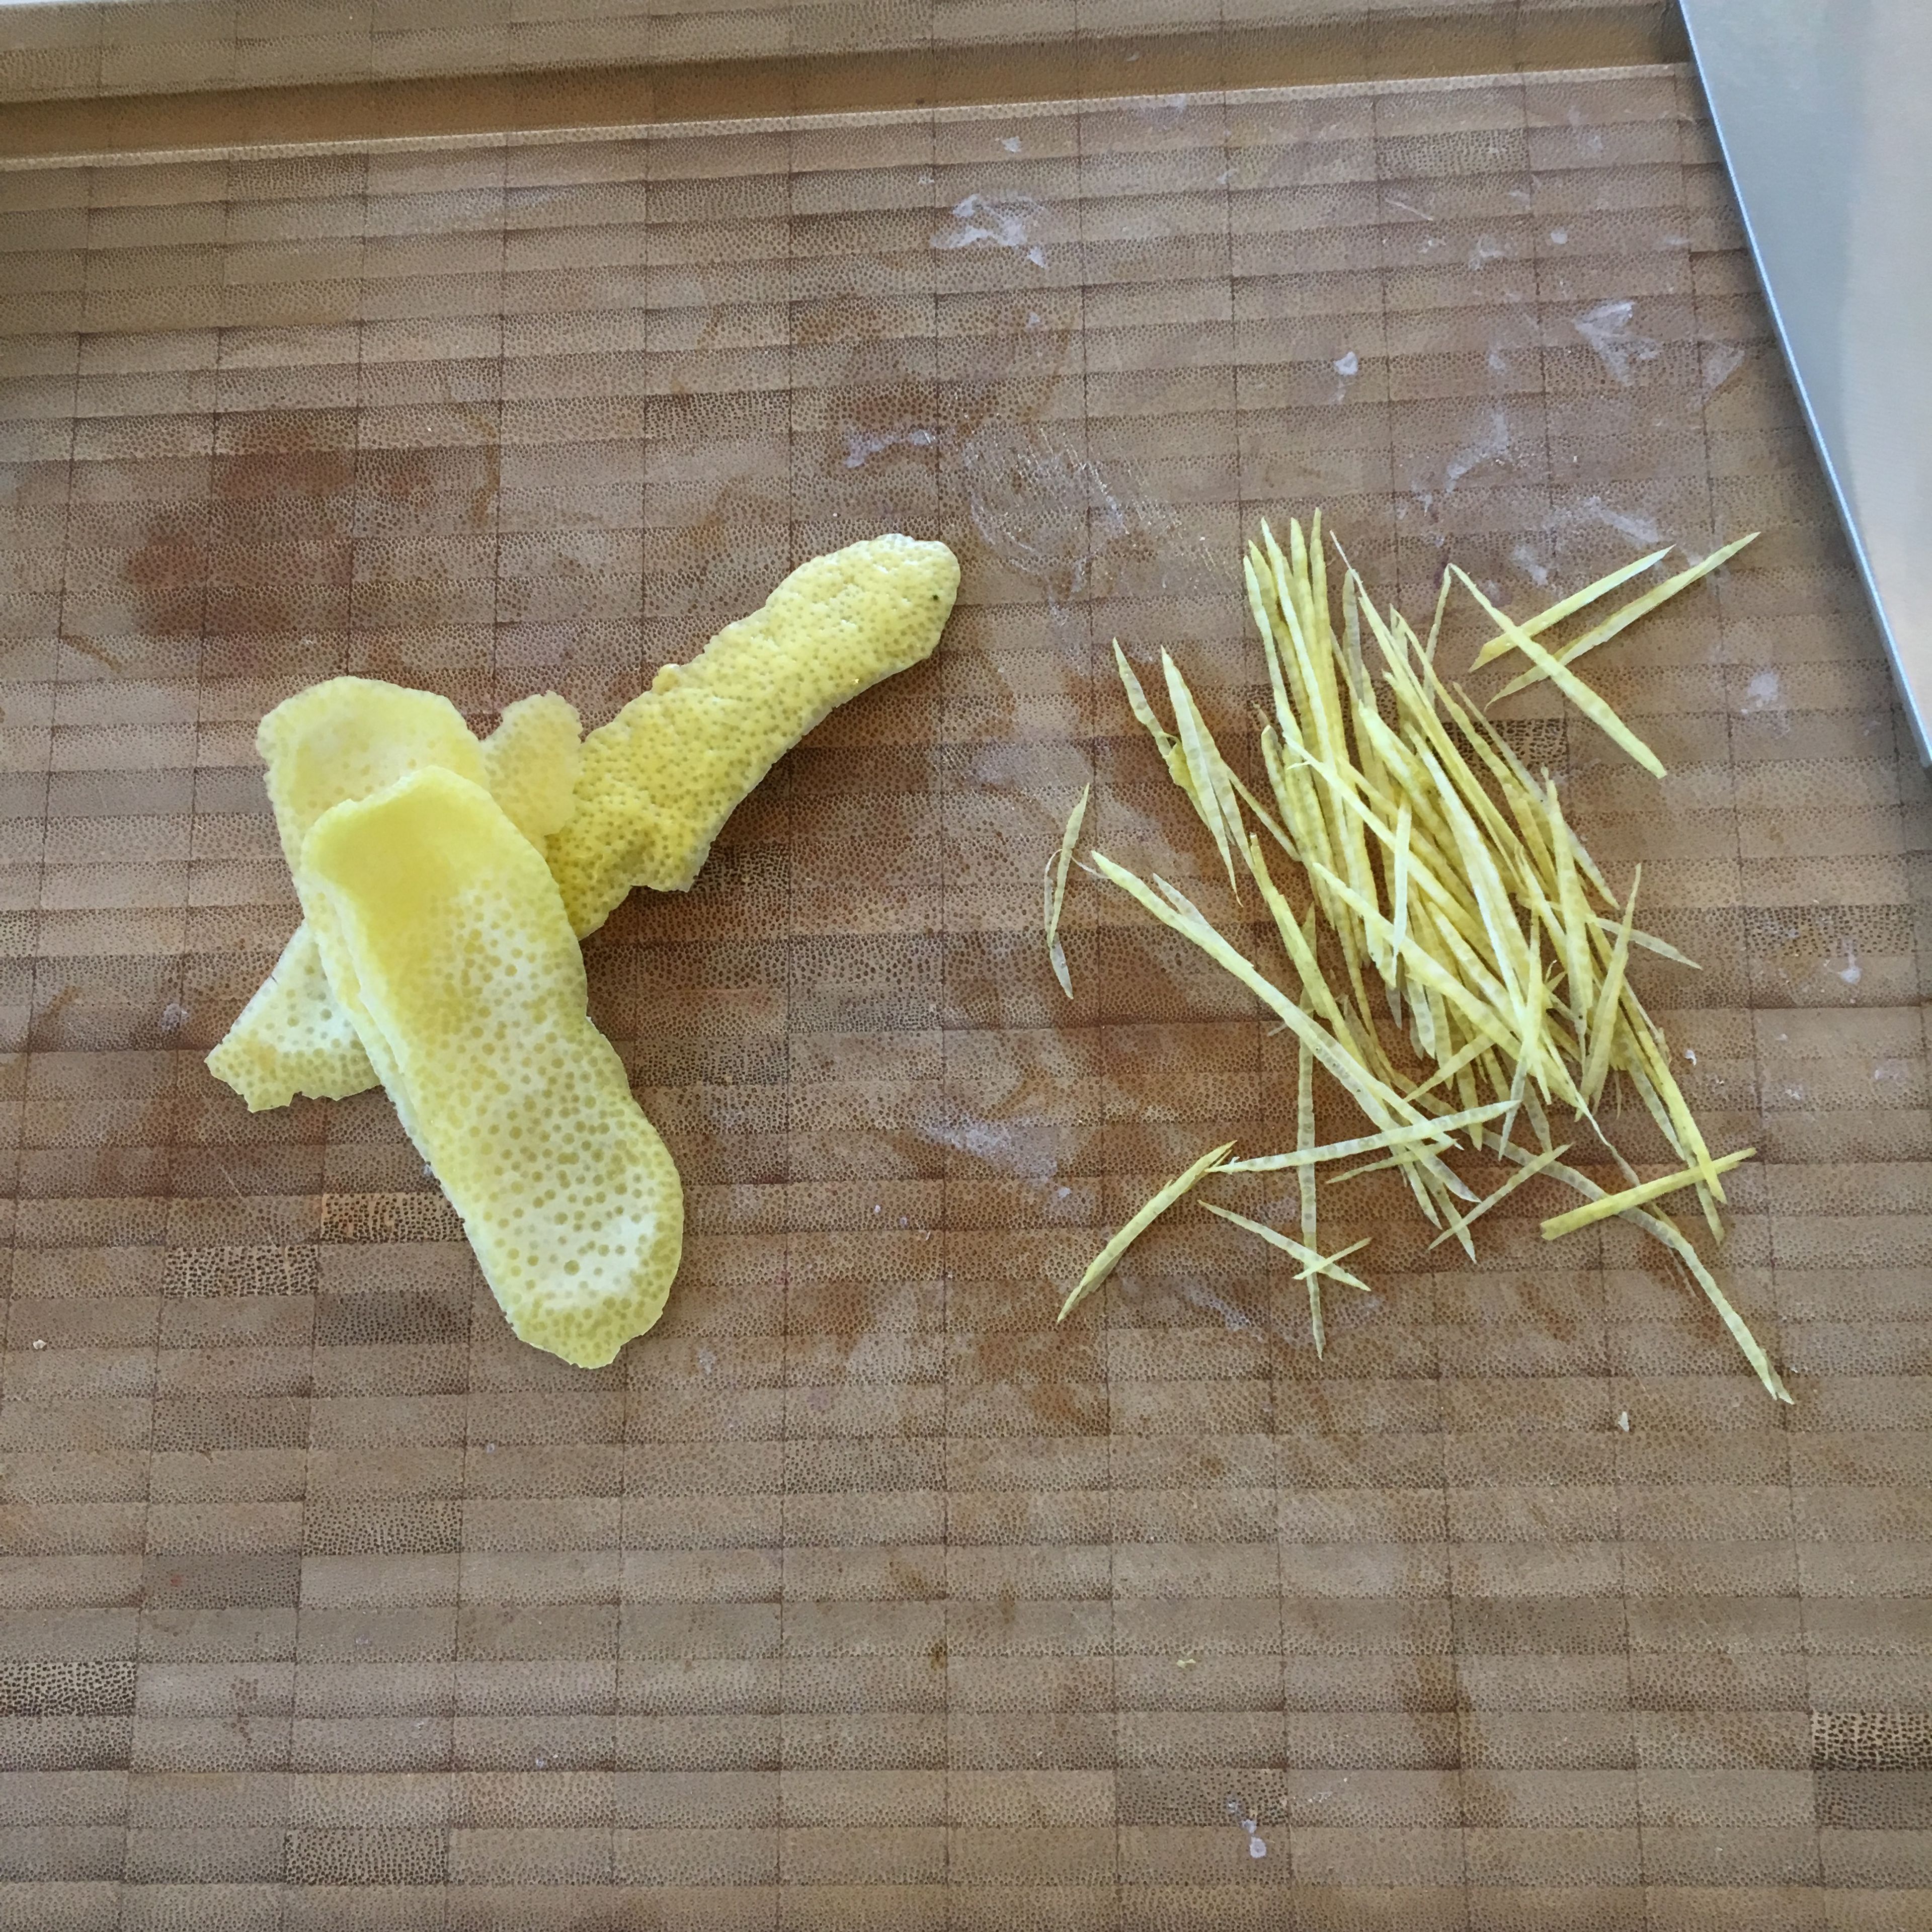 Peel a lemon and remove the white parts. Then cut the peel in super thin stripes.